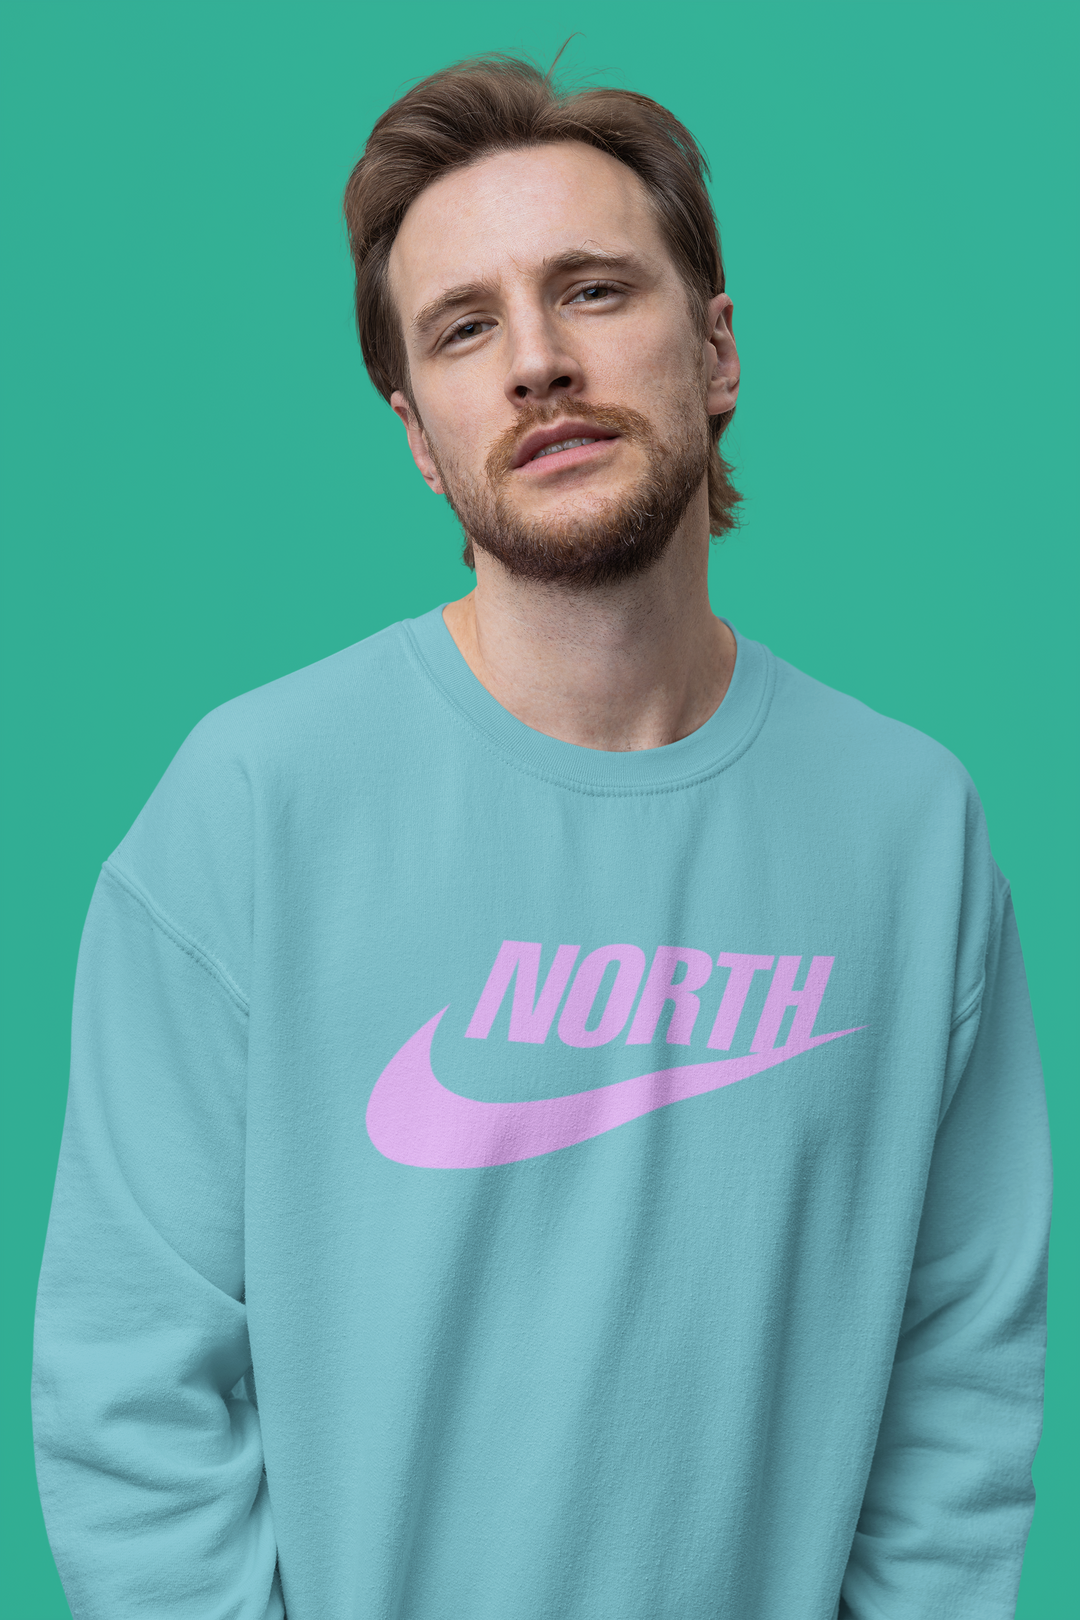 NORTH Sweaters/Hoodie - Brights Collection